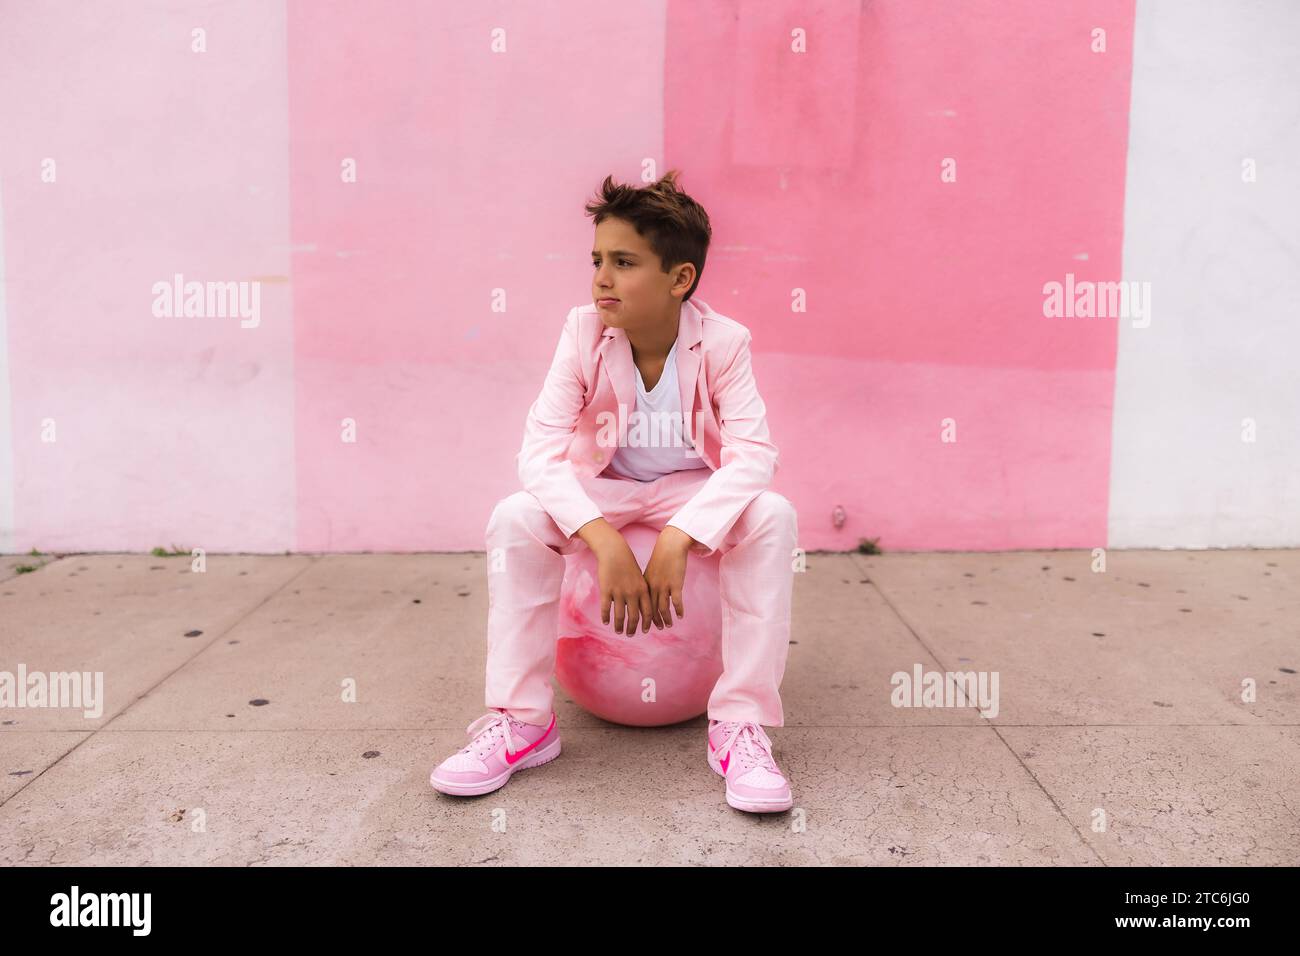 Photo young boy pondering on a ball on the sidewalk all pink Stock Photo